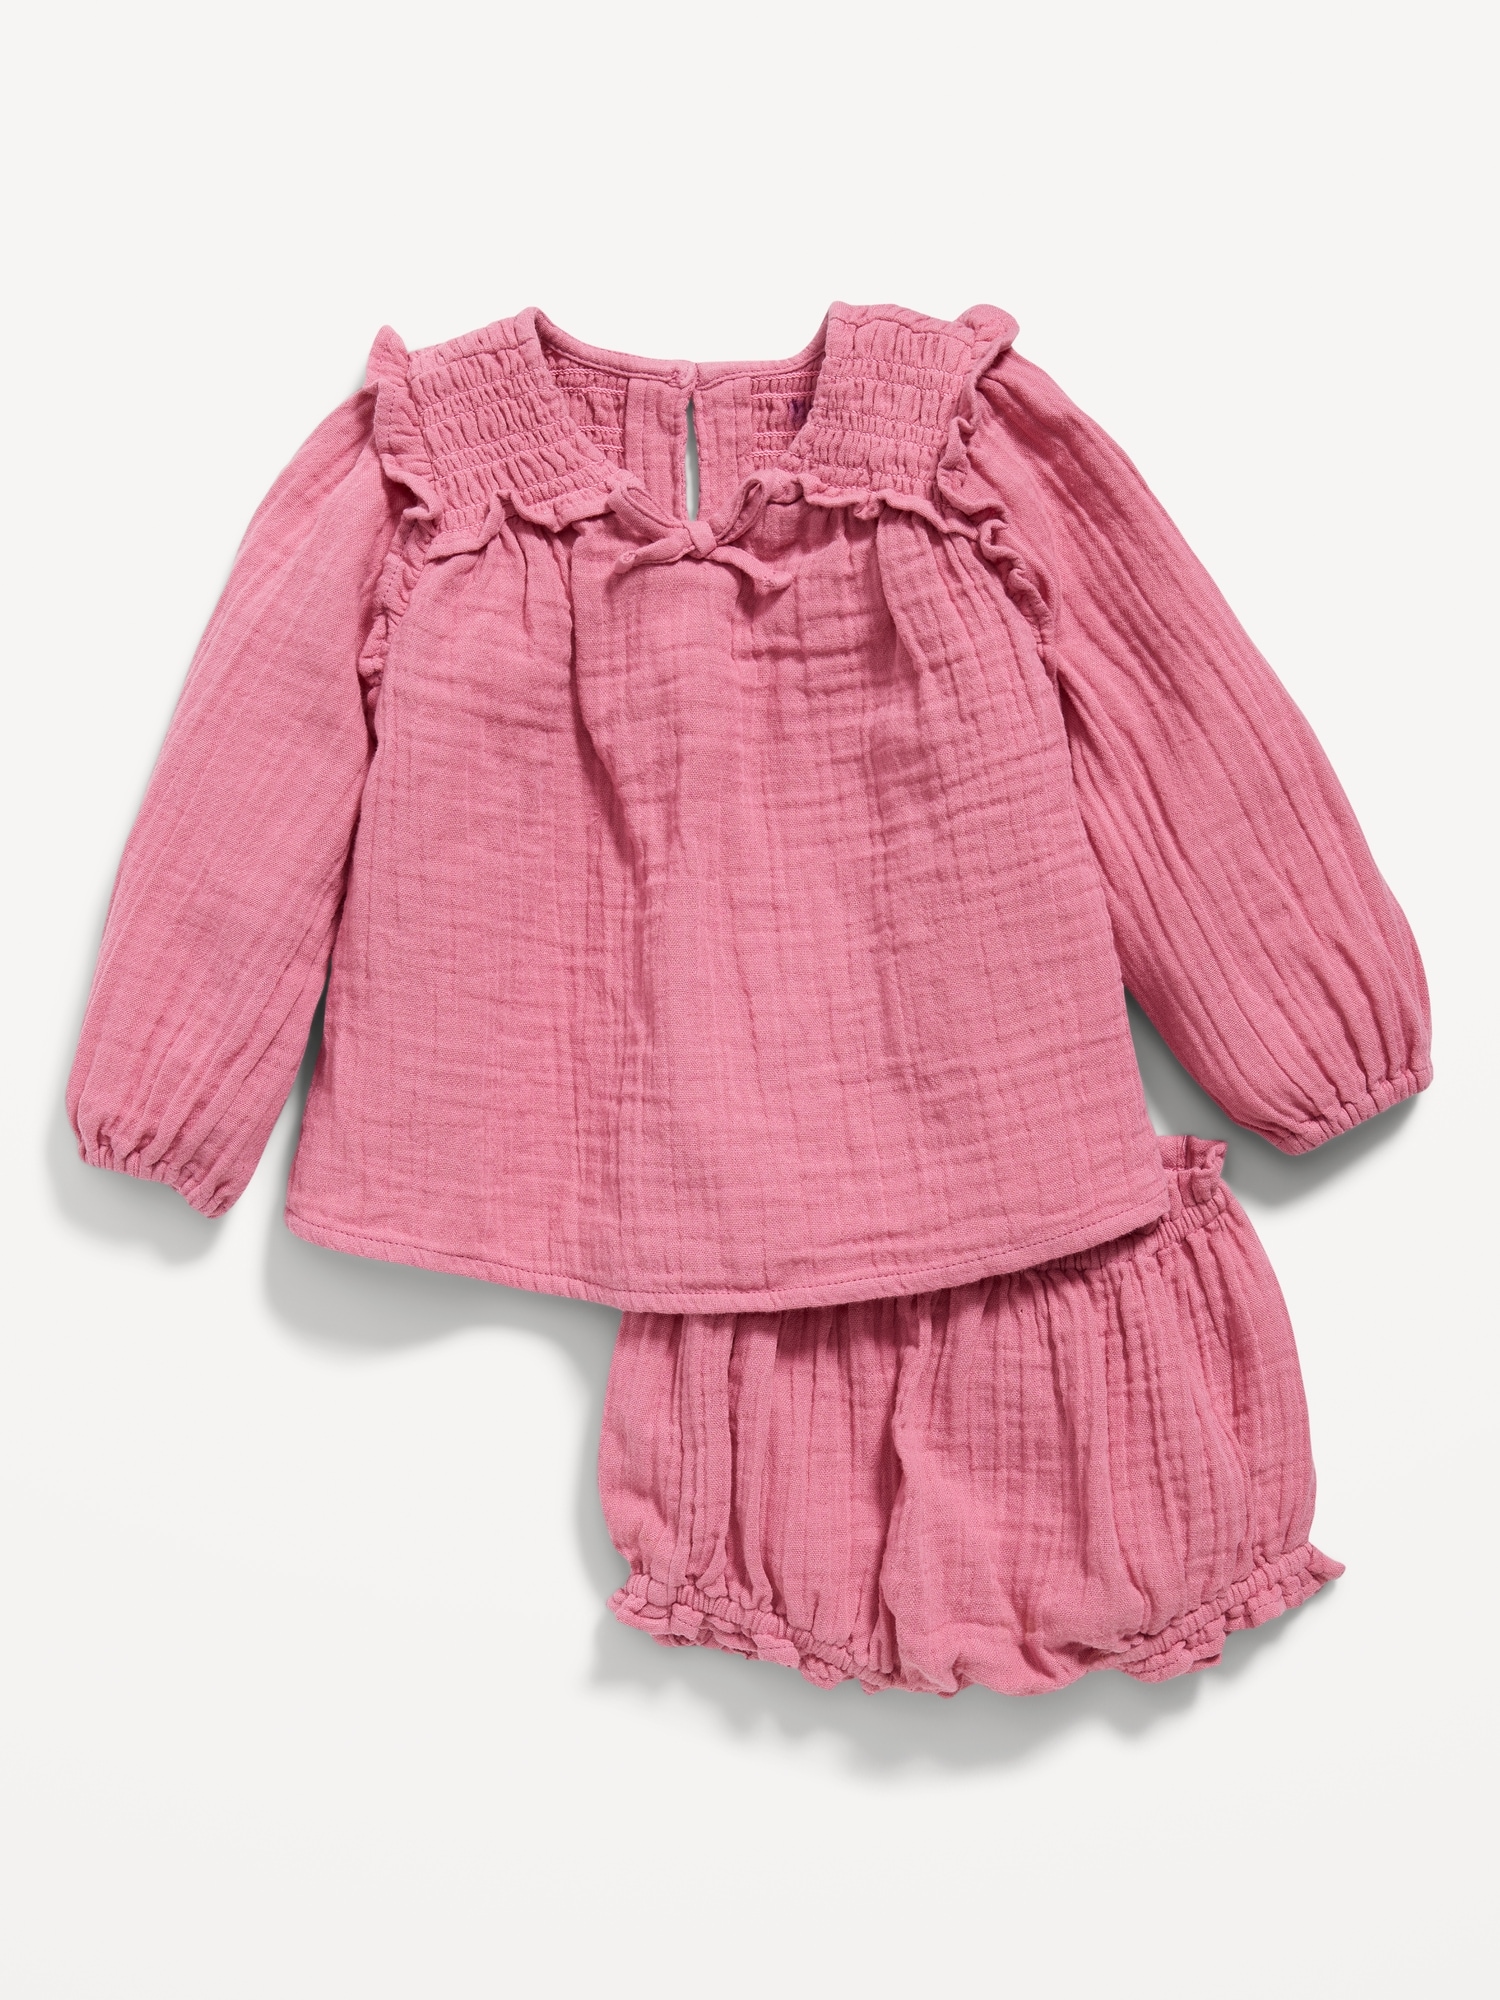 Long-Sleeve Double-Weave Smocked Top & Bloomer Shorts Set for Baby